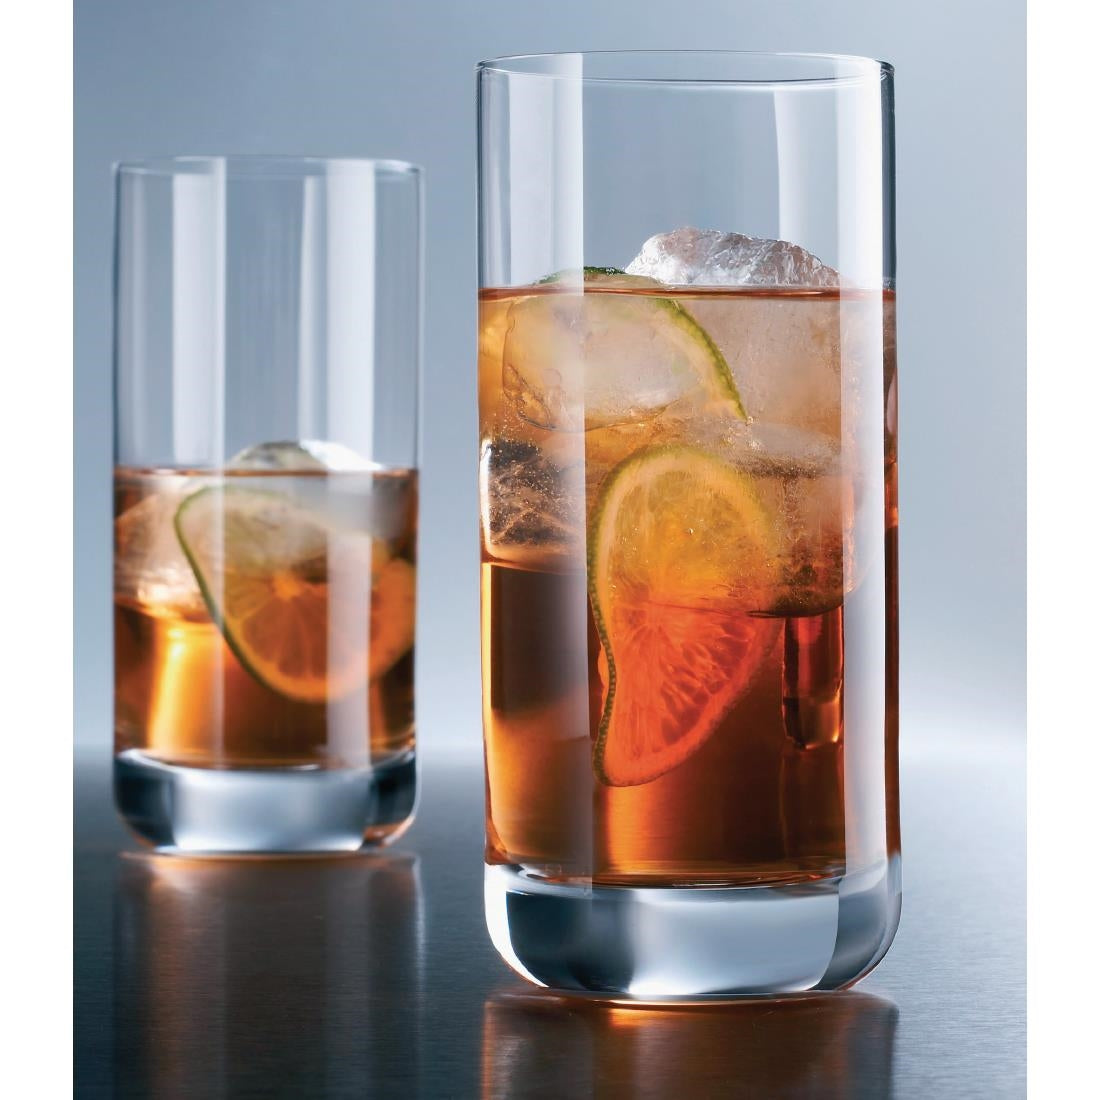 CC695 Schott Zwiesel Convention Crystal Hi Ball Glasses 390ml (Pack of 6)